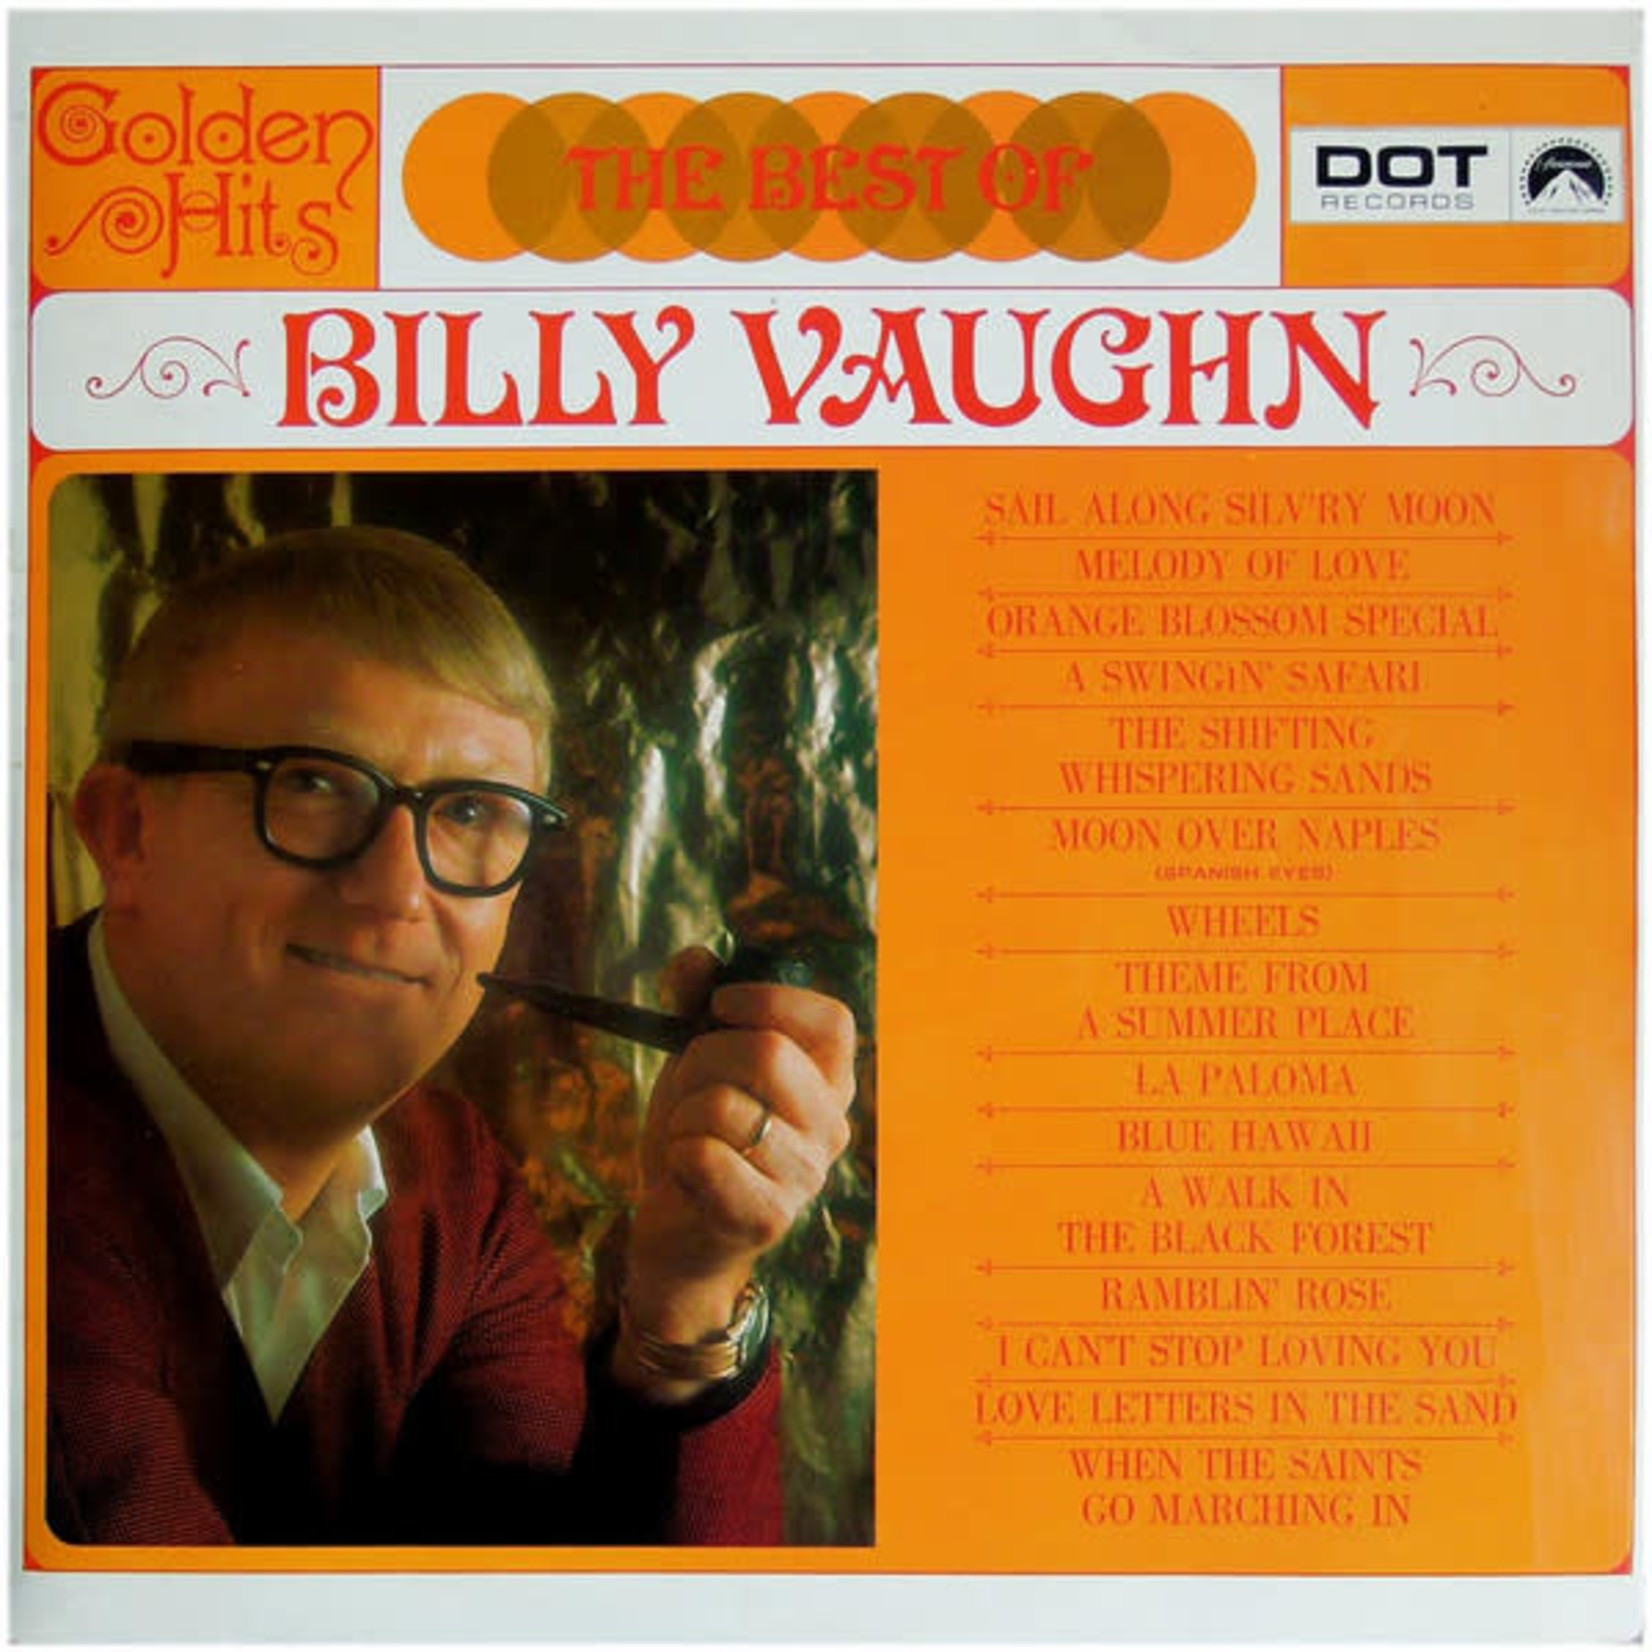 [Discontinued] Billy Vaughn - Golden Hits - Million Sellers (or Best of‚Äö√Ñ¬∂)